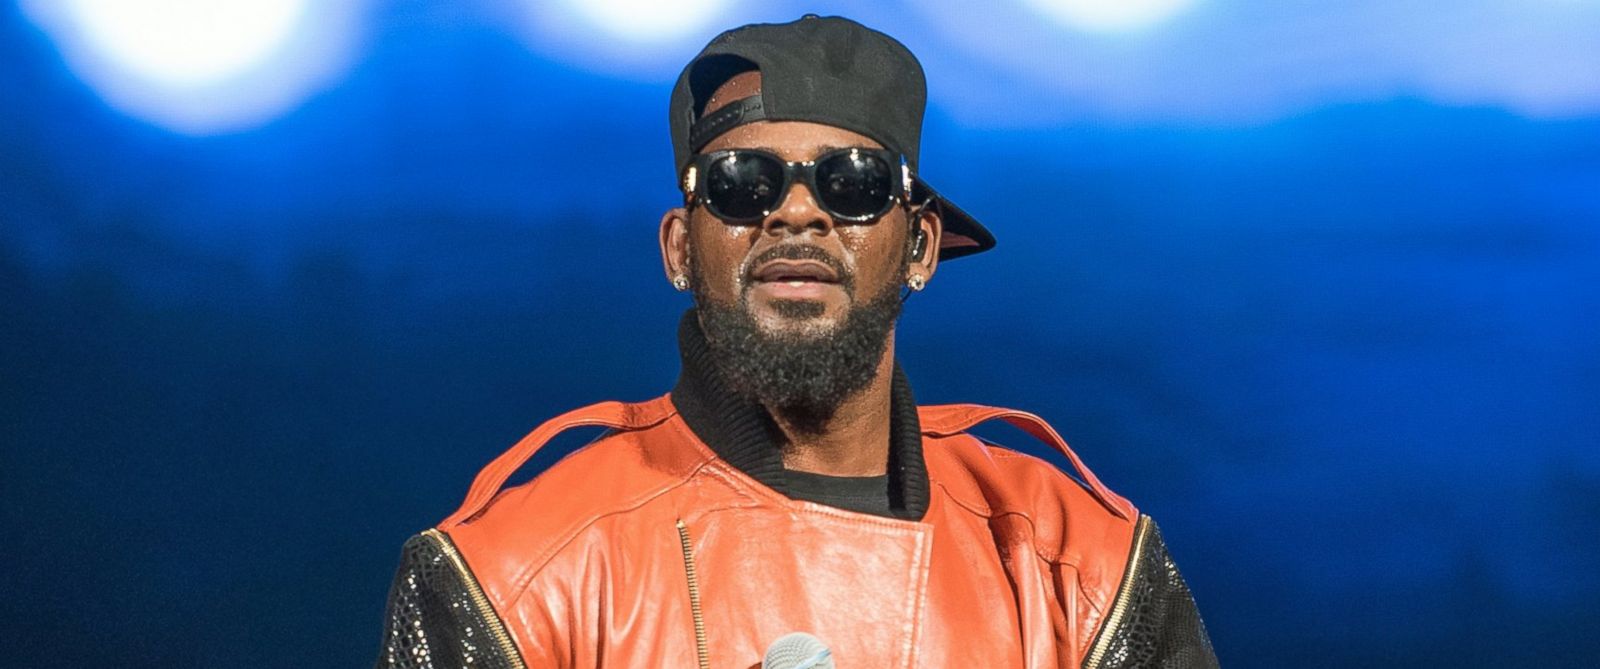 r-kelly-wallpapers